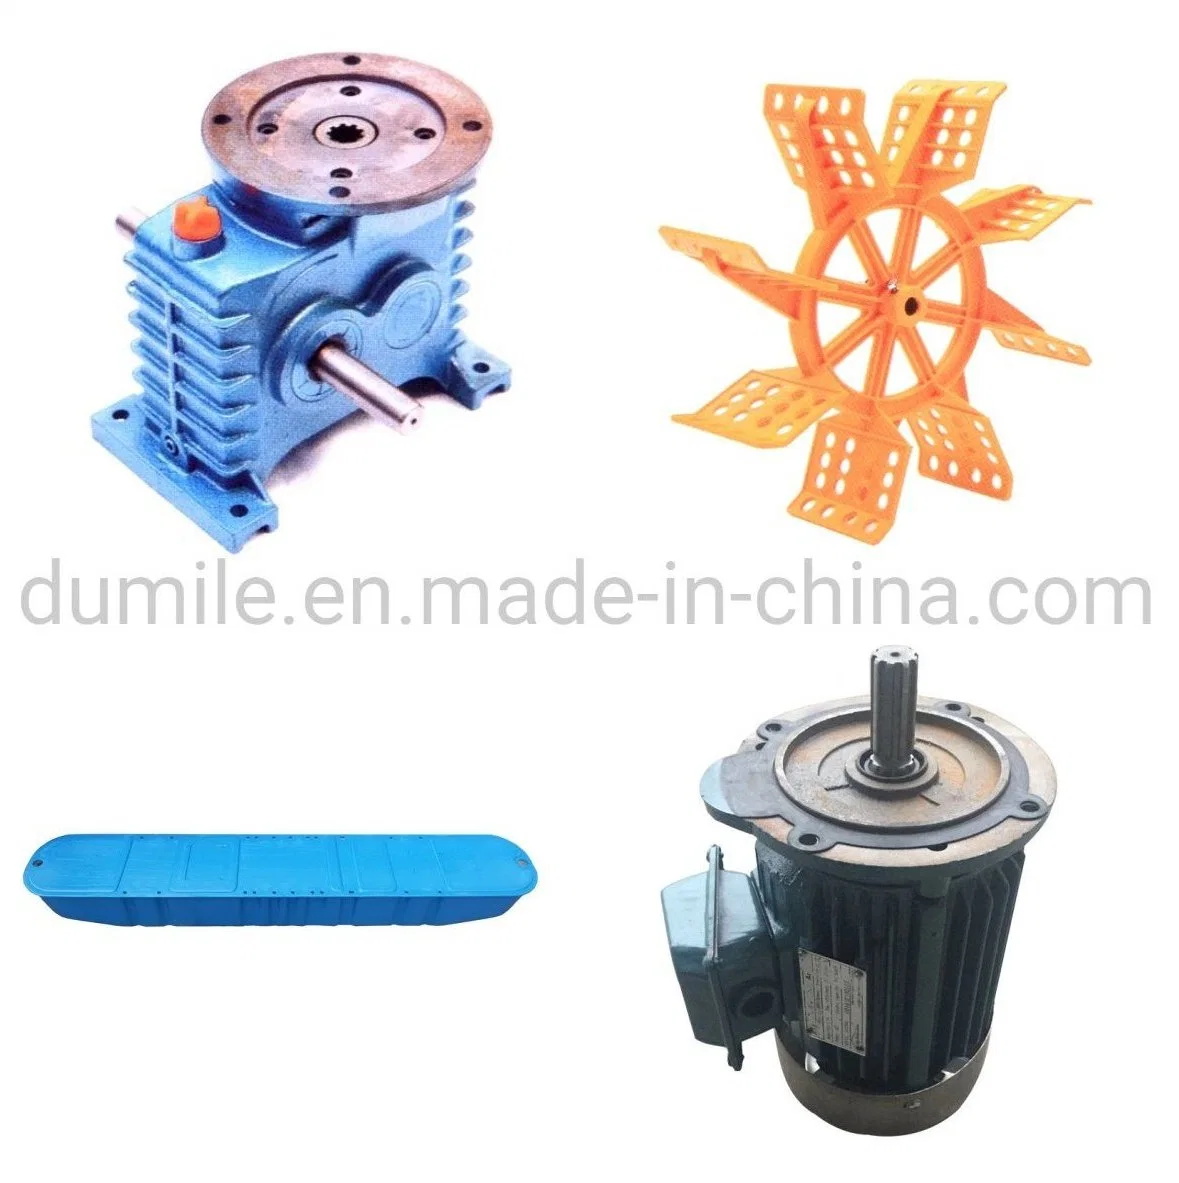 Gearbox Accessory for Aquaculture Pond Paddle Wheel Aerator Spare Parts